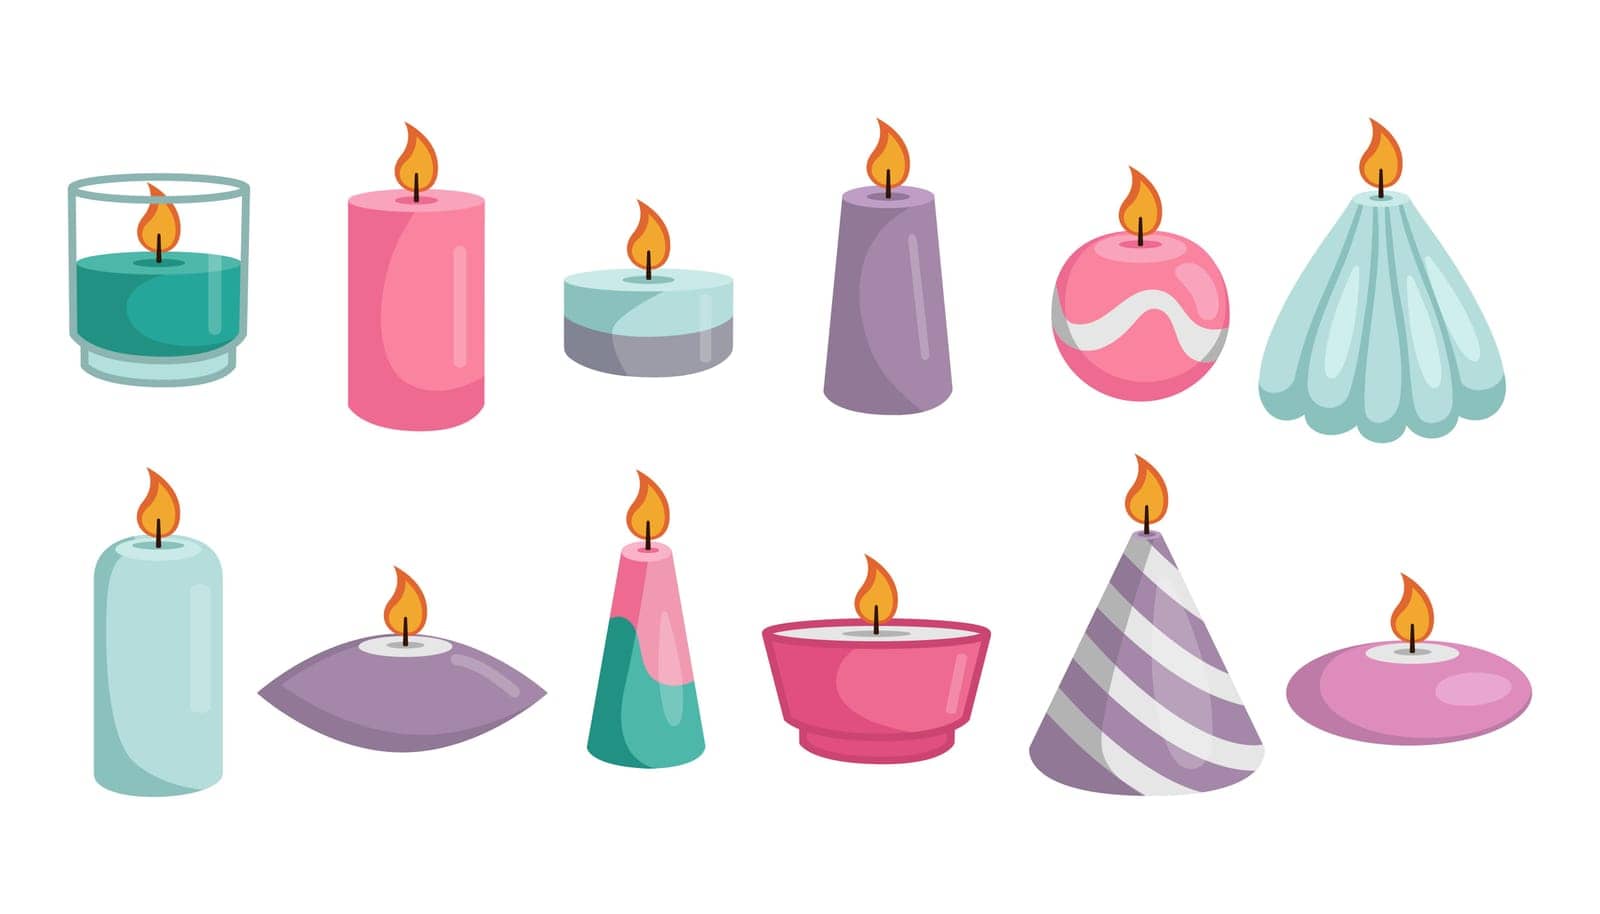 Aroma candles with candlesticks set. Vector illustrations of aromatic candlelight decorations. Cartoon burning scented candles of different shapes isolated on white. Aromatherapy, celebration concept